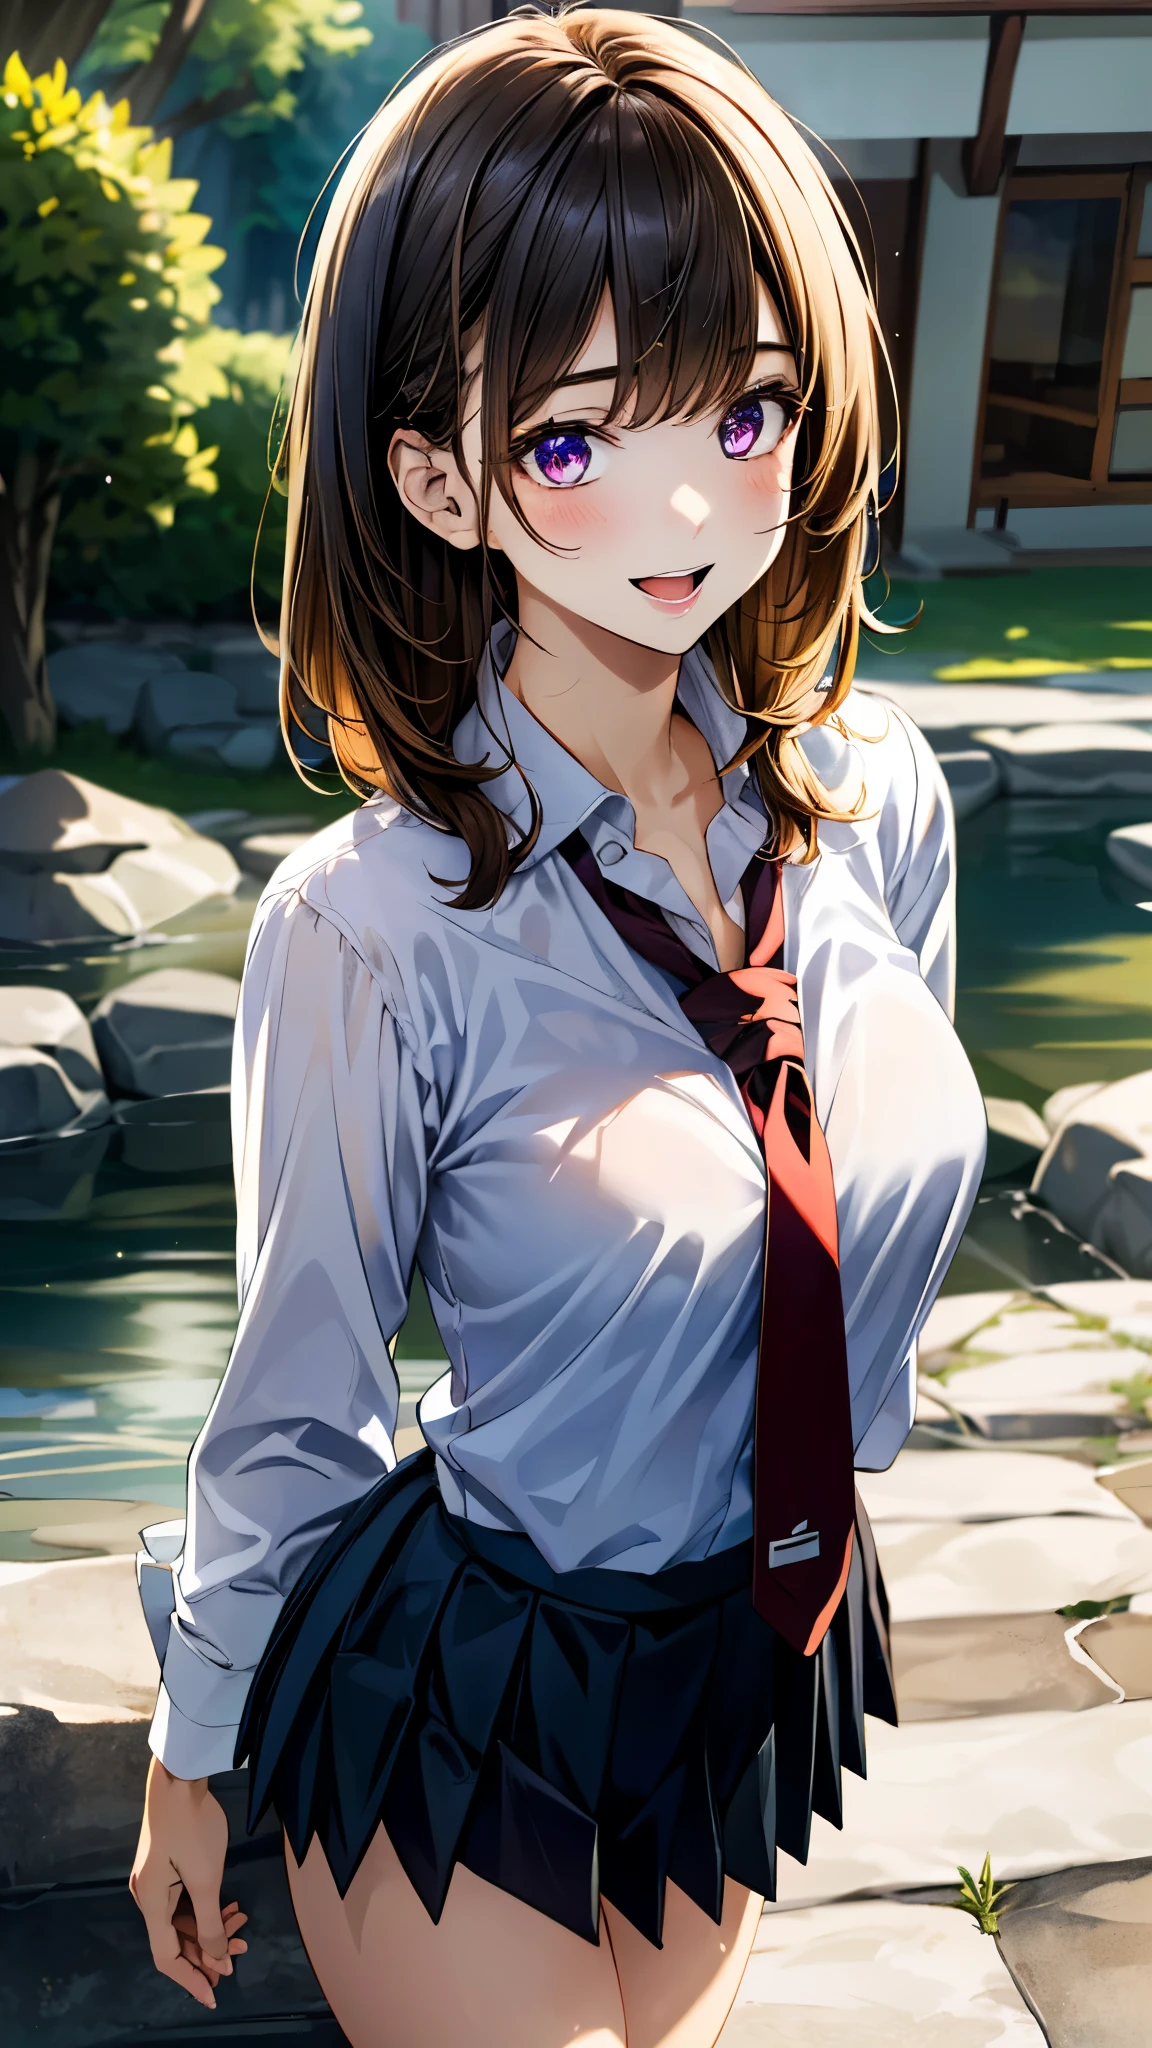 (masterpiece:1.3, top-quality, ultra high res, ultra detailed), (realistic, photorealistic:1.4), beautiful illustration, perfect lighting, natural lighting, colorful, depth of fields, 
beautiful detailed hair, beautiful detailed face, beautiful detailed eyes, beautiful clavicle, beautiful body, beautiful chest, beautiful thigh, beautiful legs, beautiful fingers, 
looking at viewer, 1 girl, japanese, high school girl, perfect face, (perfect anatomy, anatomically correct), cute and symmetrical face, babyface, , shiny skin, 
(middle hair:1.5, straight hair:1.4, blonde hair), swept bangs, cliped bangs, dark purple eyes, long eye lasher, (medium breasts), slender, 
((collared white shirt, navy pleated skirt, dark red tie)), navy school socks, , 
(beautiful scenery), evening, (hot spring town), standing, hands on chest, (seductive smile, open mouth), 